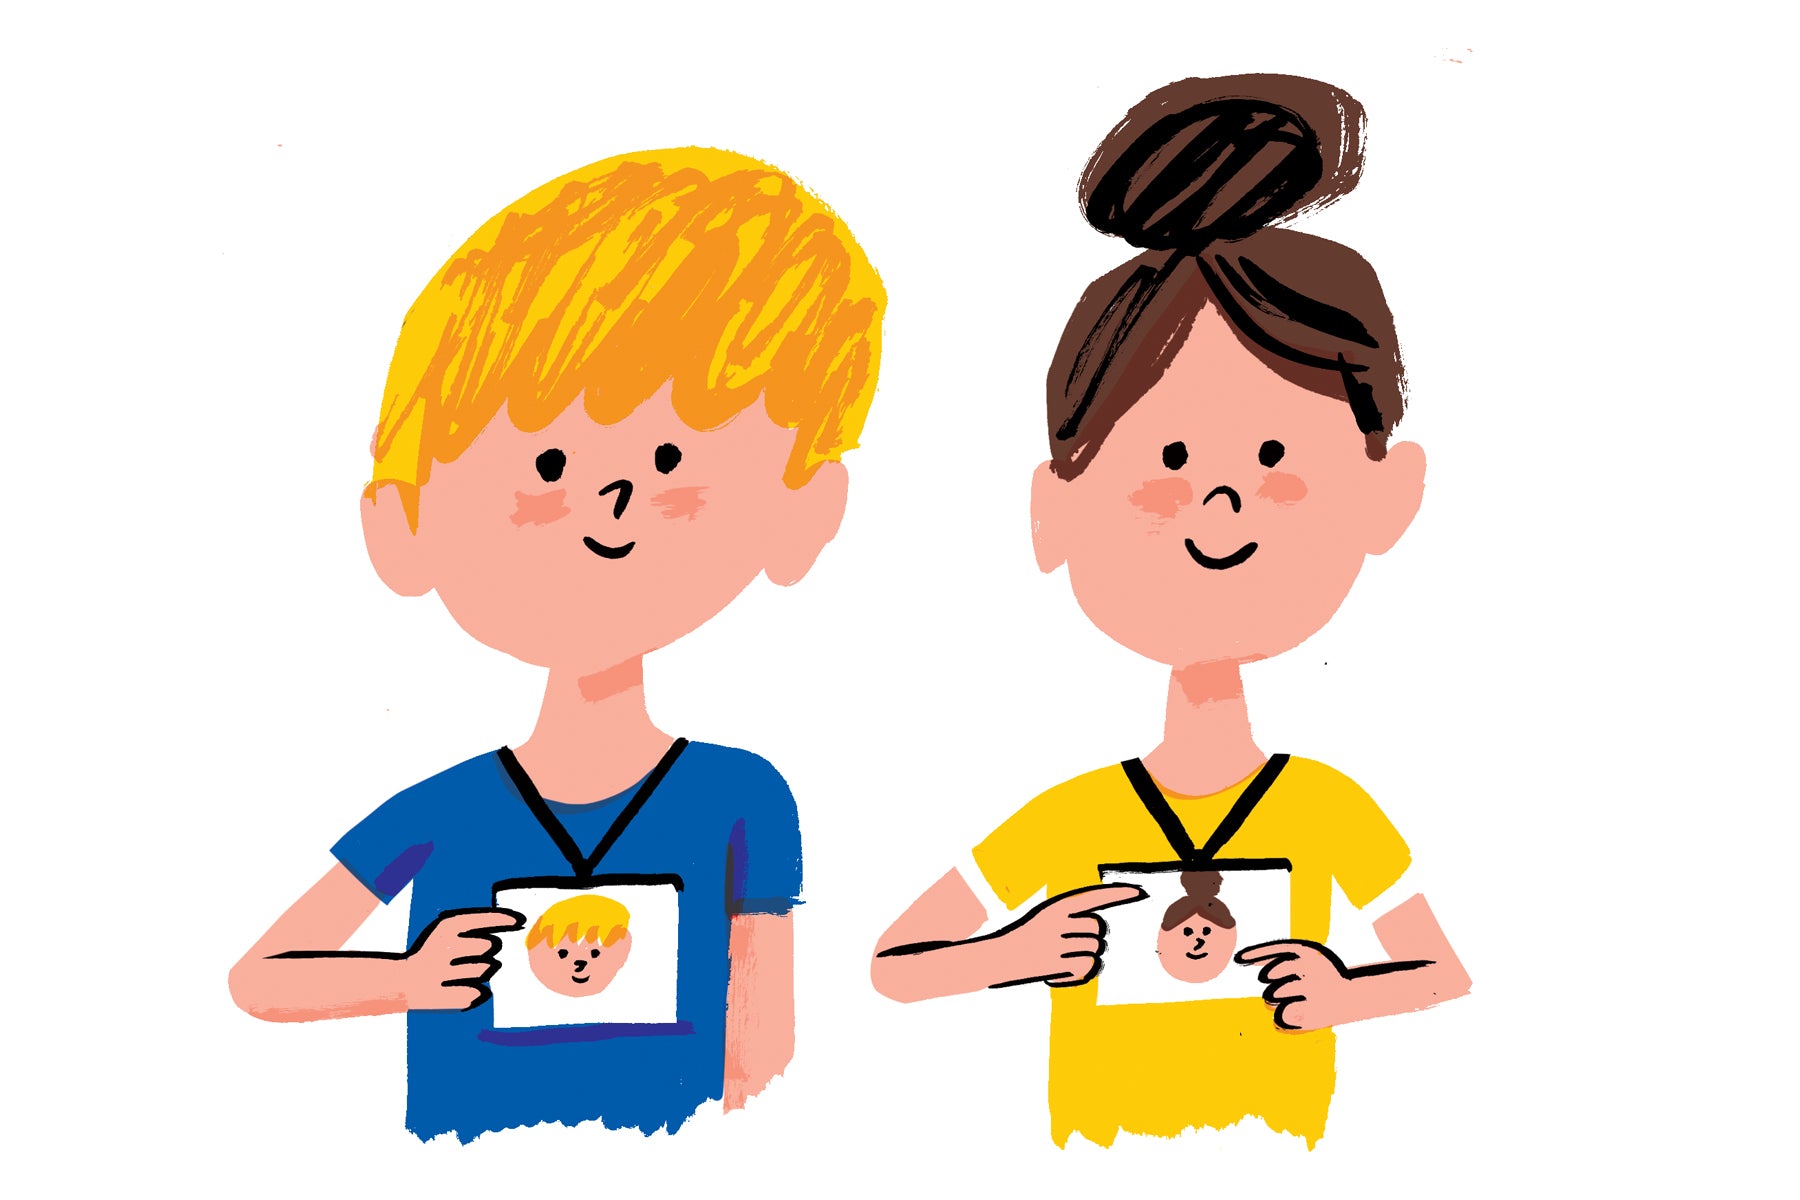 Illustration of two young children with name tags that are drawings of their own faces